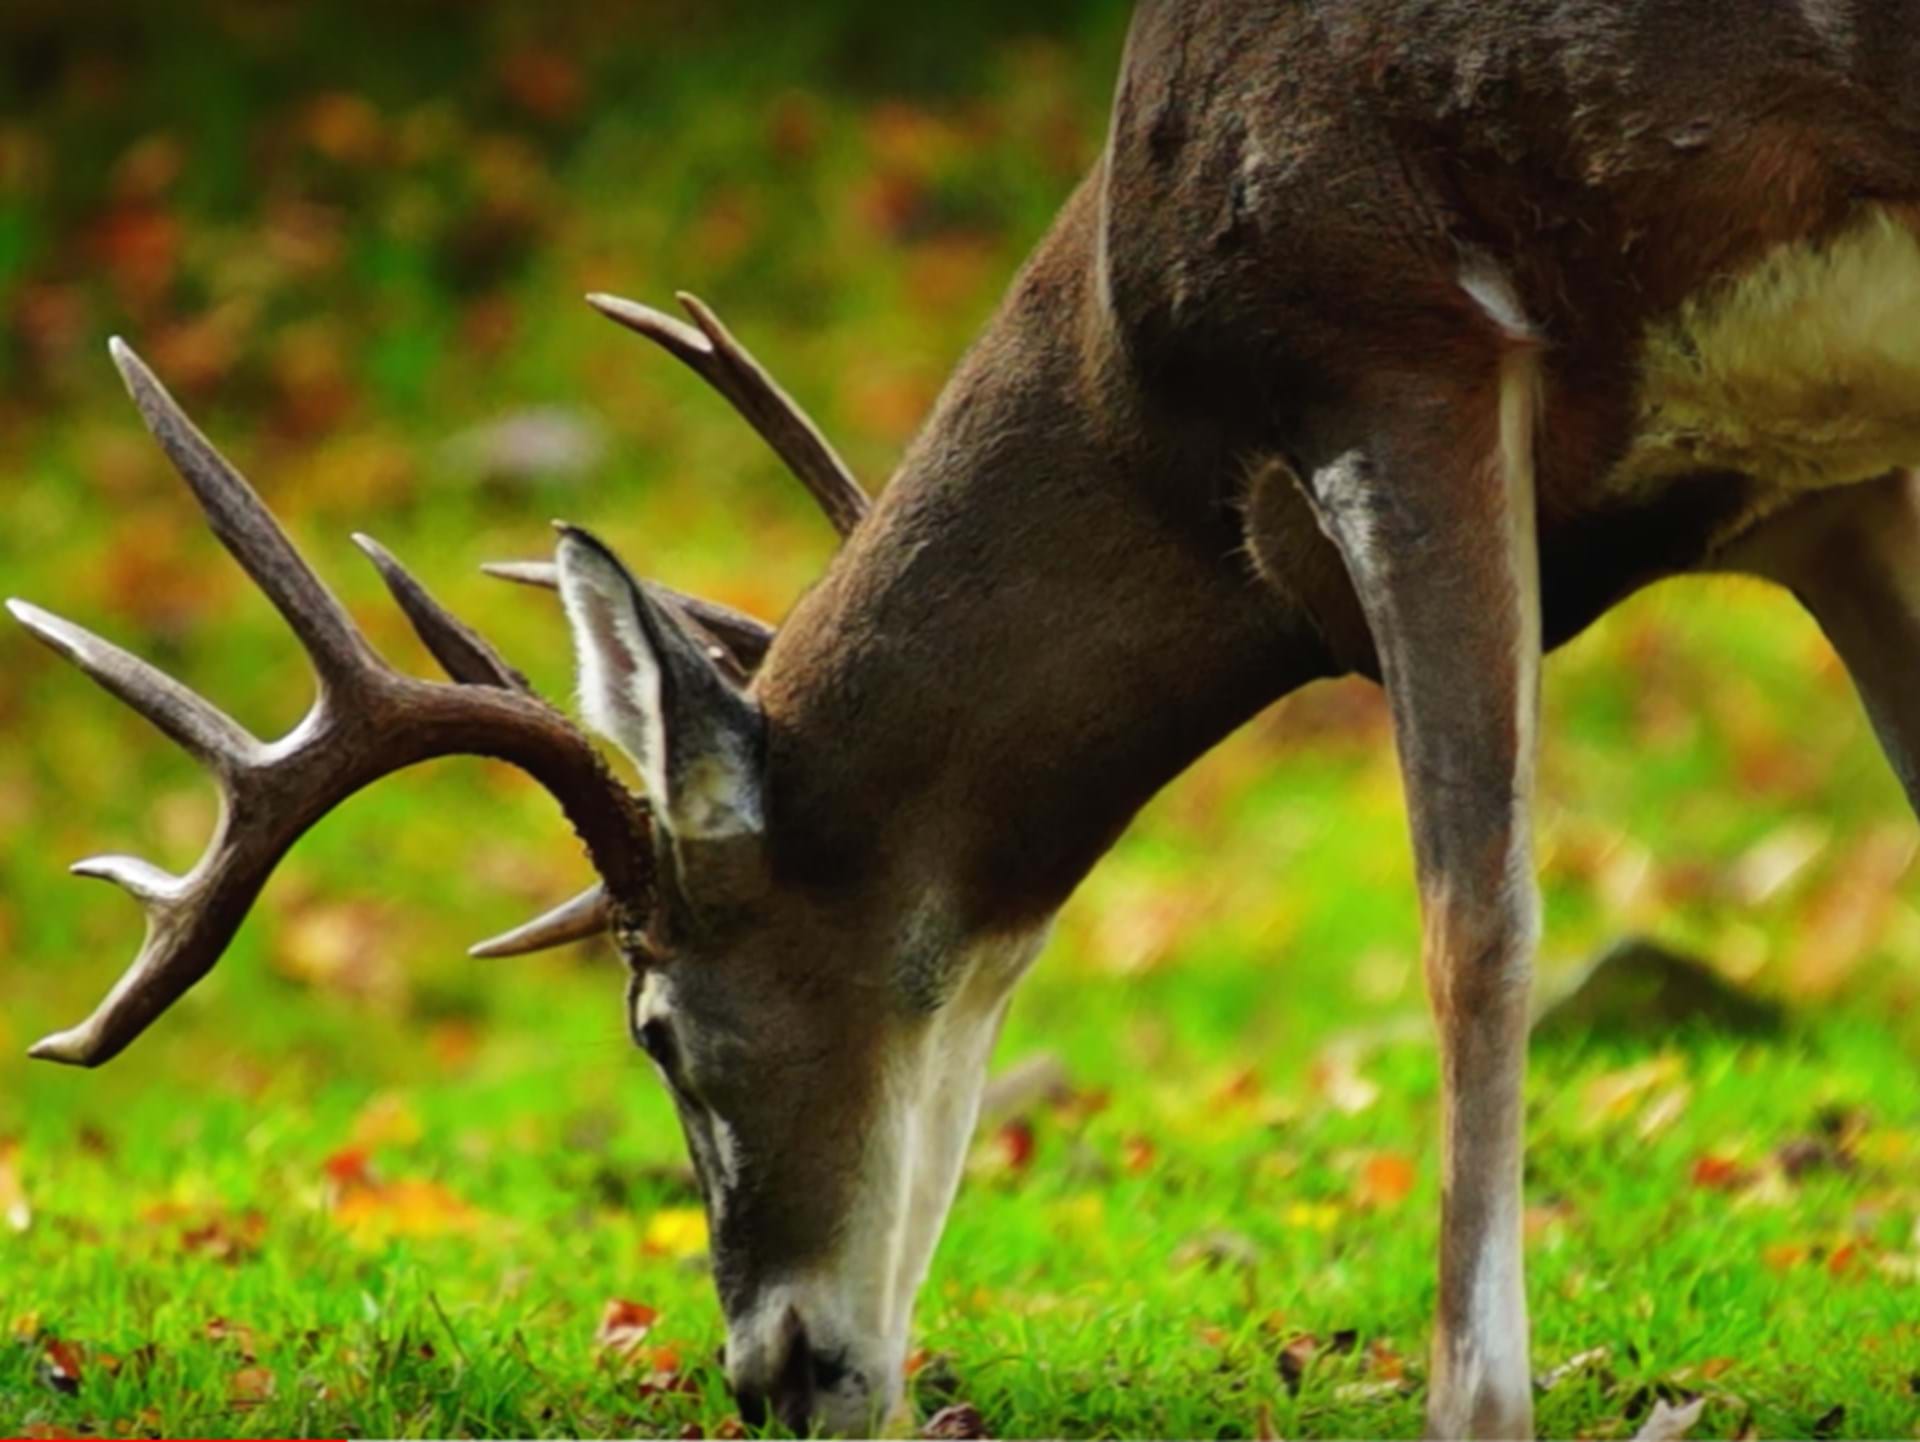 Appanoose County was named one of the top hunting destinations in the U.S.